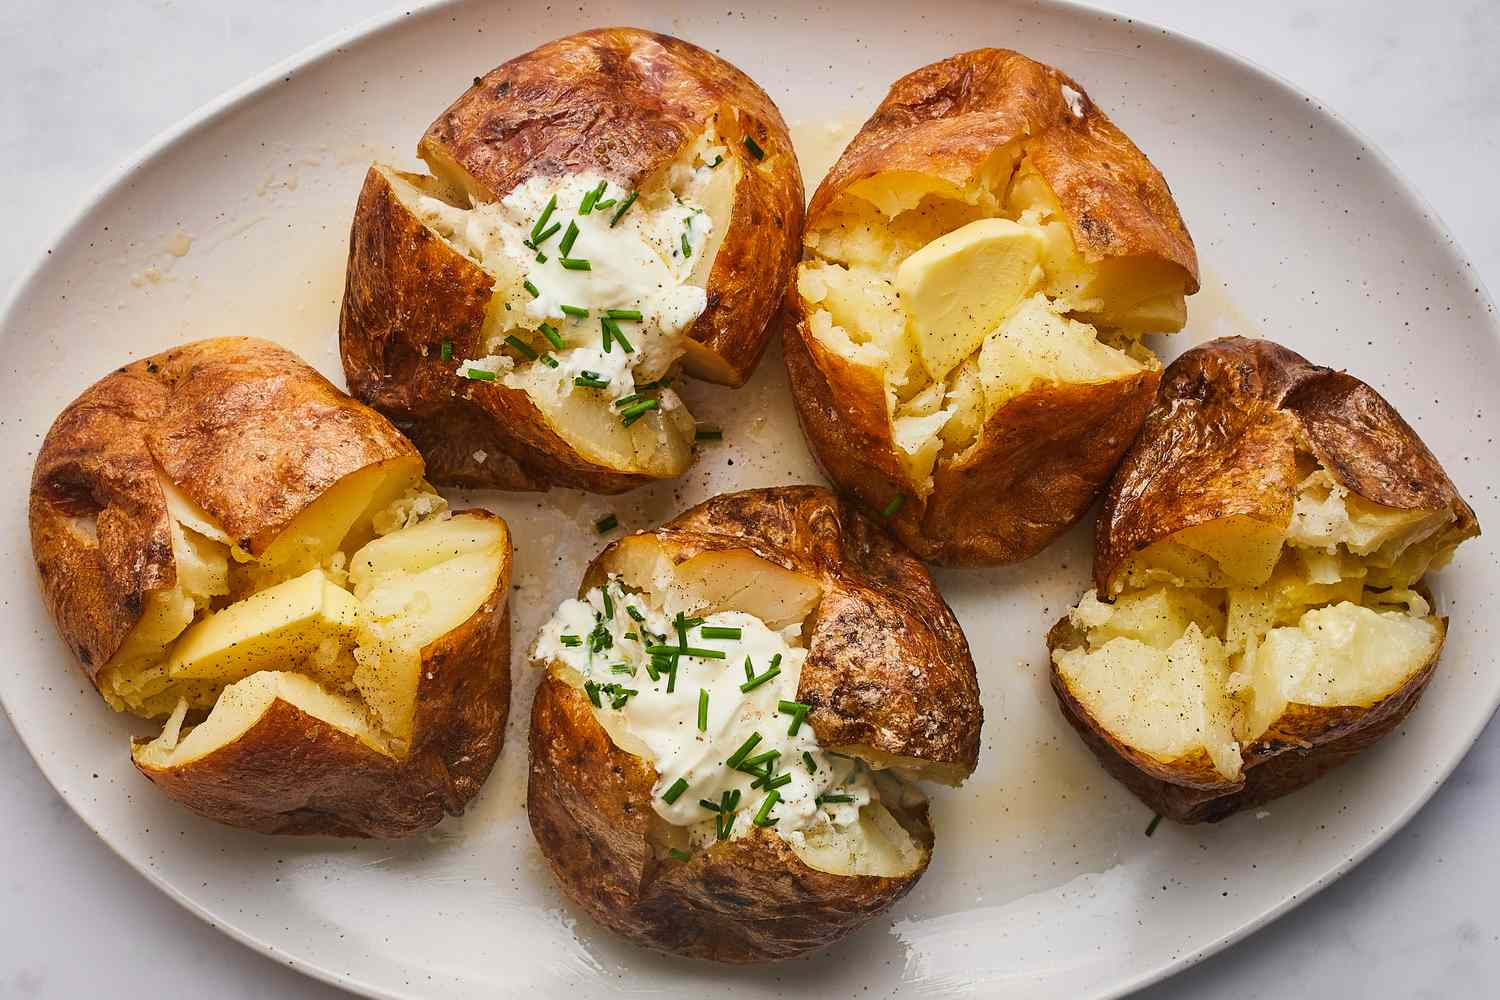 Baked Potatoes Variety - Buttered and Topped with Sour Cream and Chives, Ideal Companions for Brisket